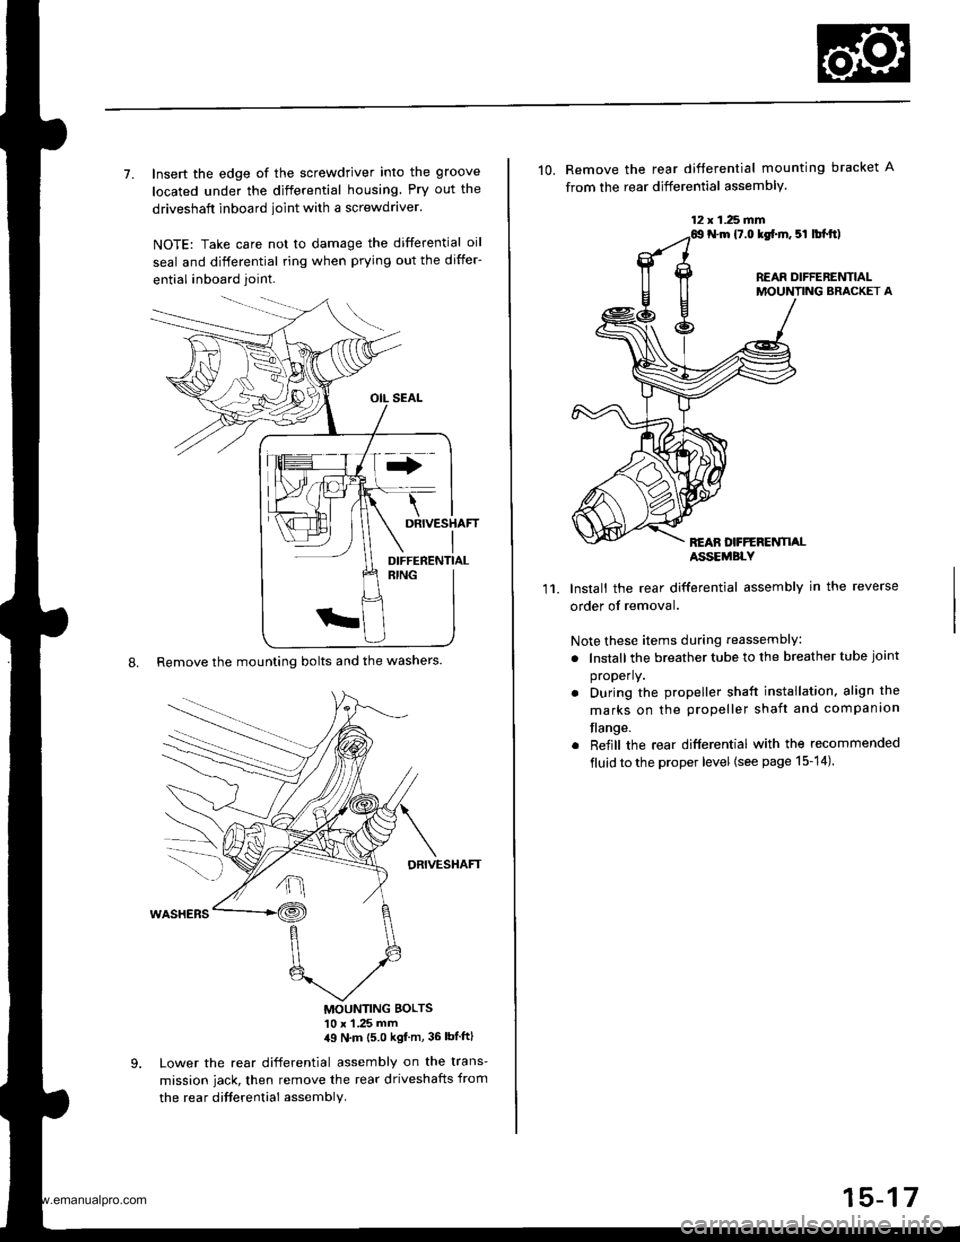 HONDA CR-V 1997 RD1-RD3 / 1.G User Guide 
7. Insert the edge of the screwdriver into the groove
located under the differential housing Pry out the
driveshaft inboard ioint with a screwdraver.
NOTE: Take care not to damage the differential oi